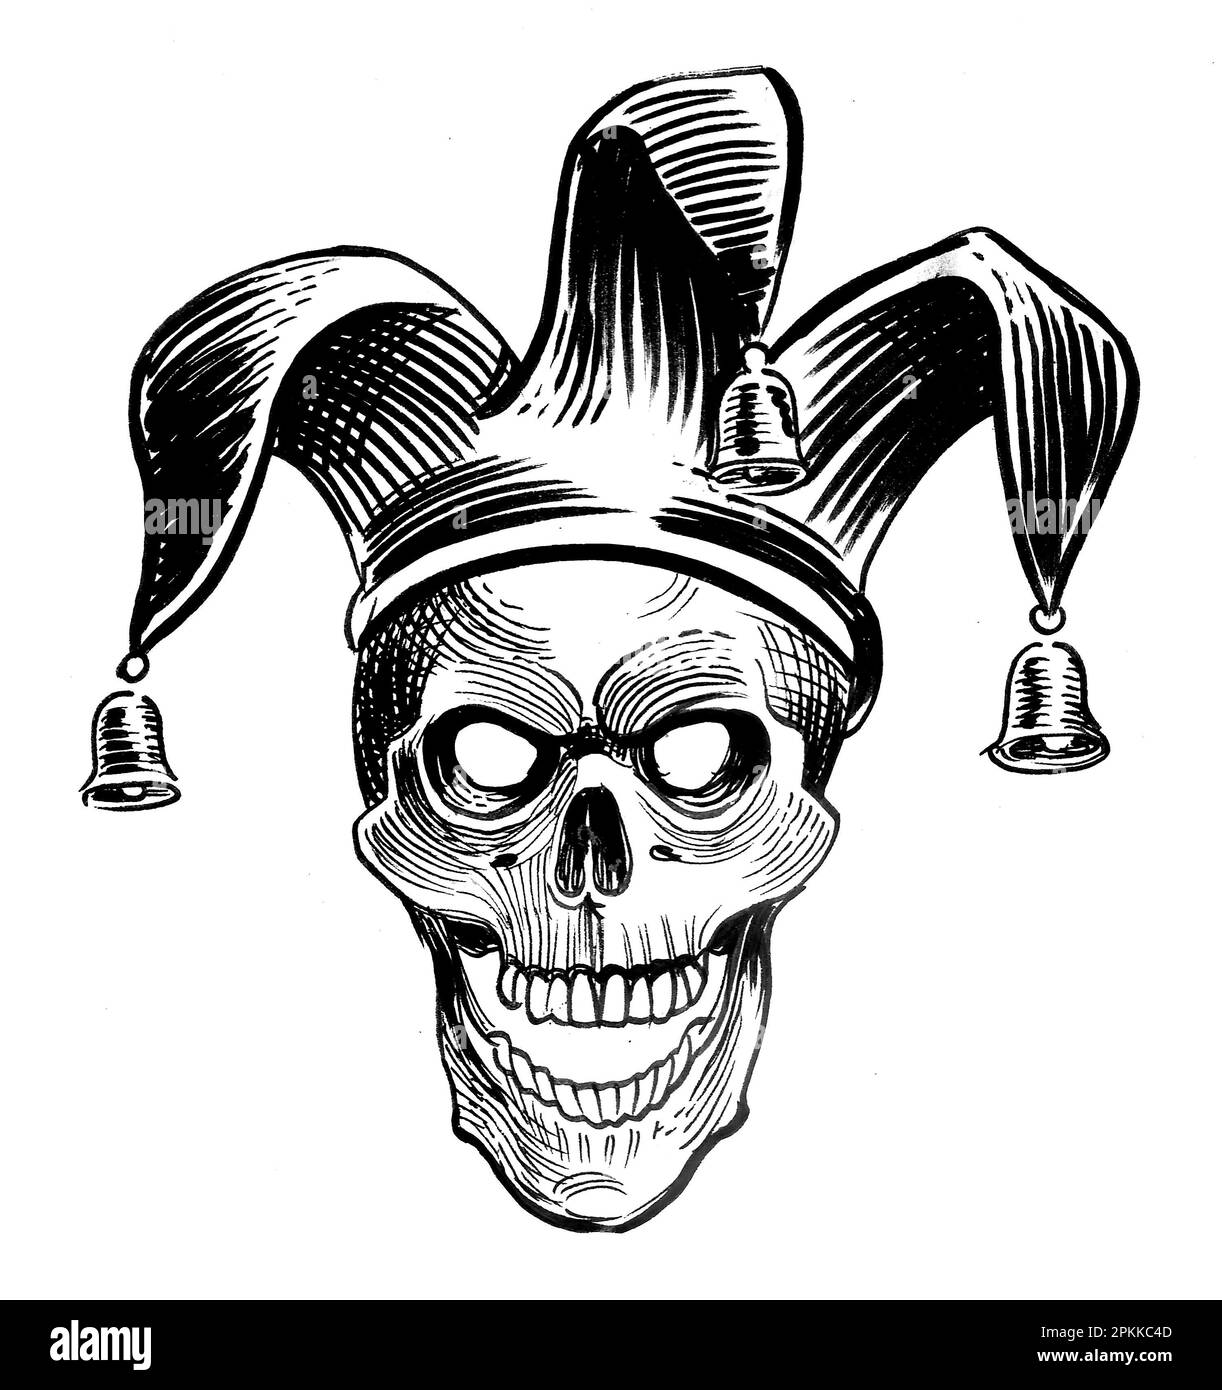 Evil skull in jester's hat. Ink black and white drawing Stock Photo - Alamy